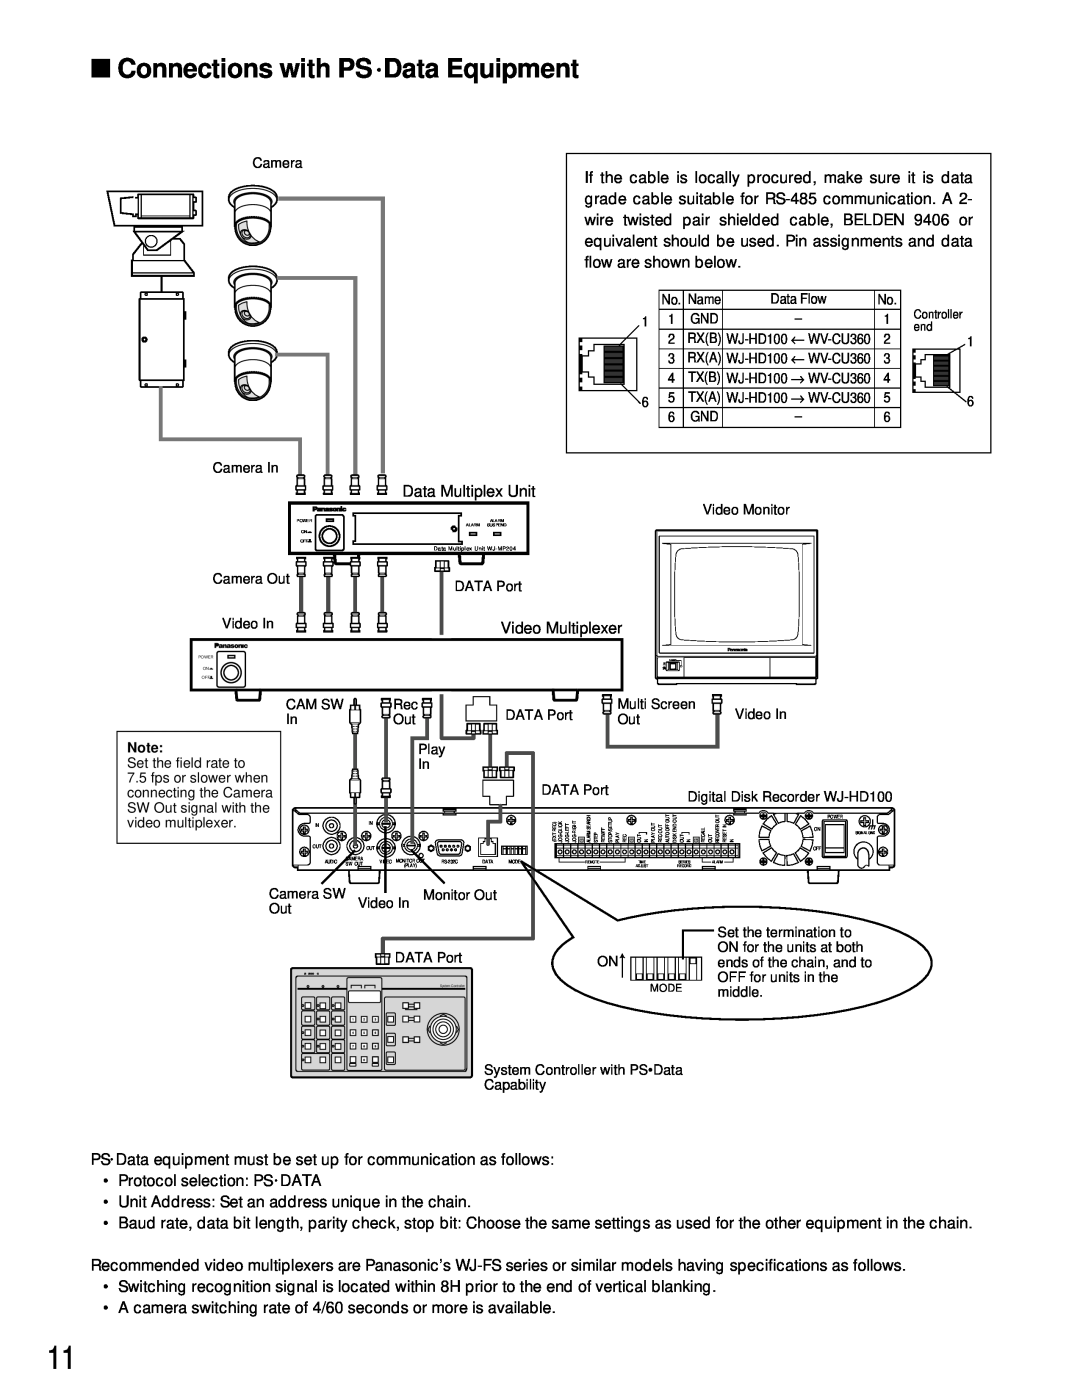 Panasonic WJ-HD100 operating instructions Connections with PS Data Equipment 